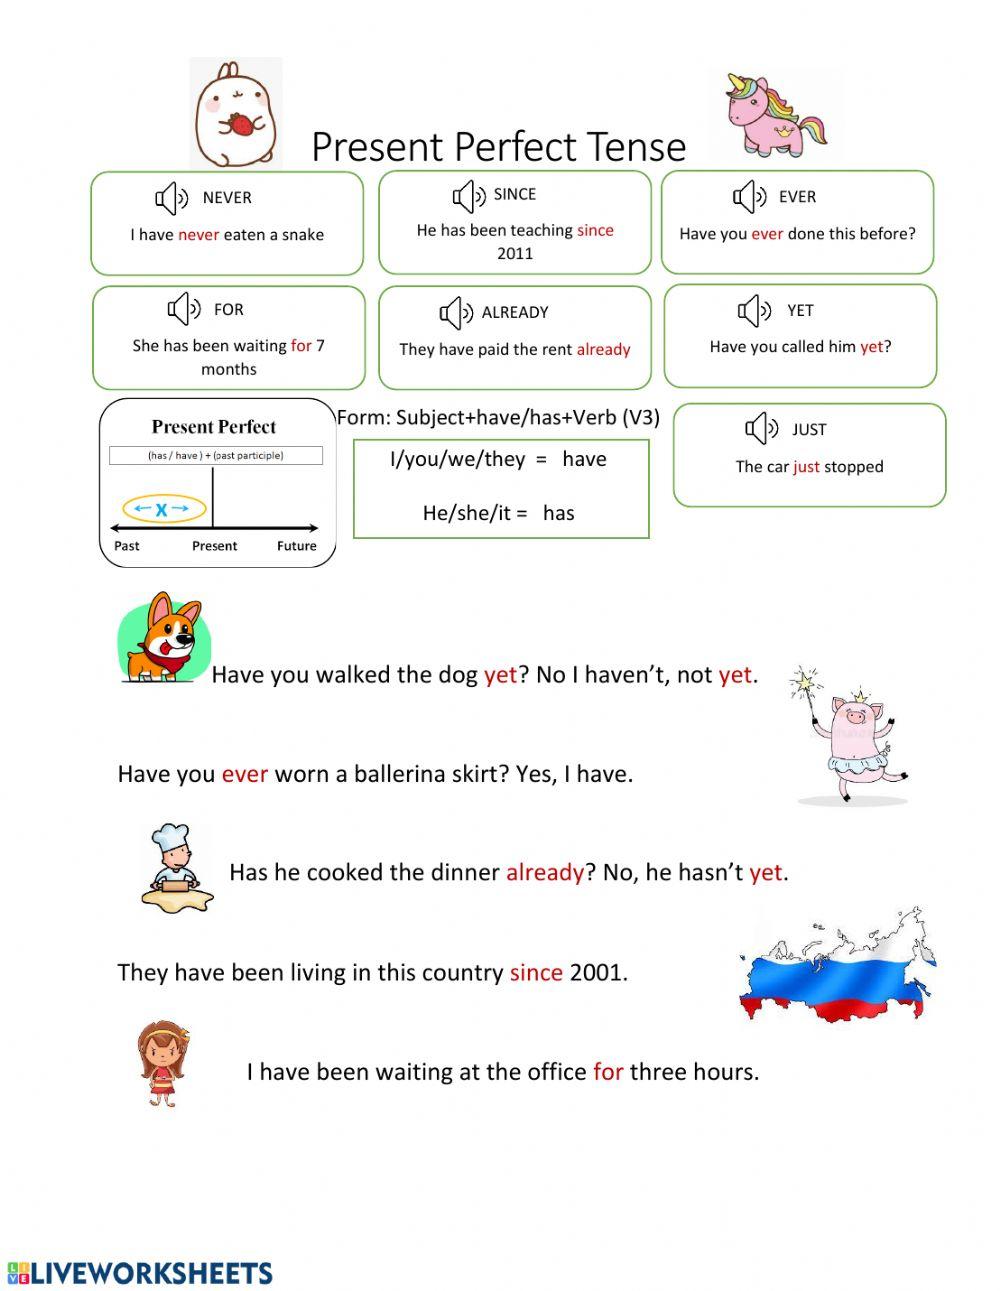 Present Perfect Word examples